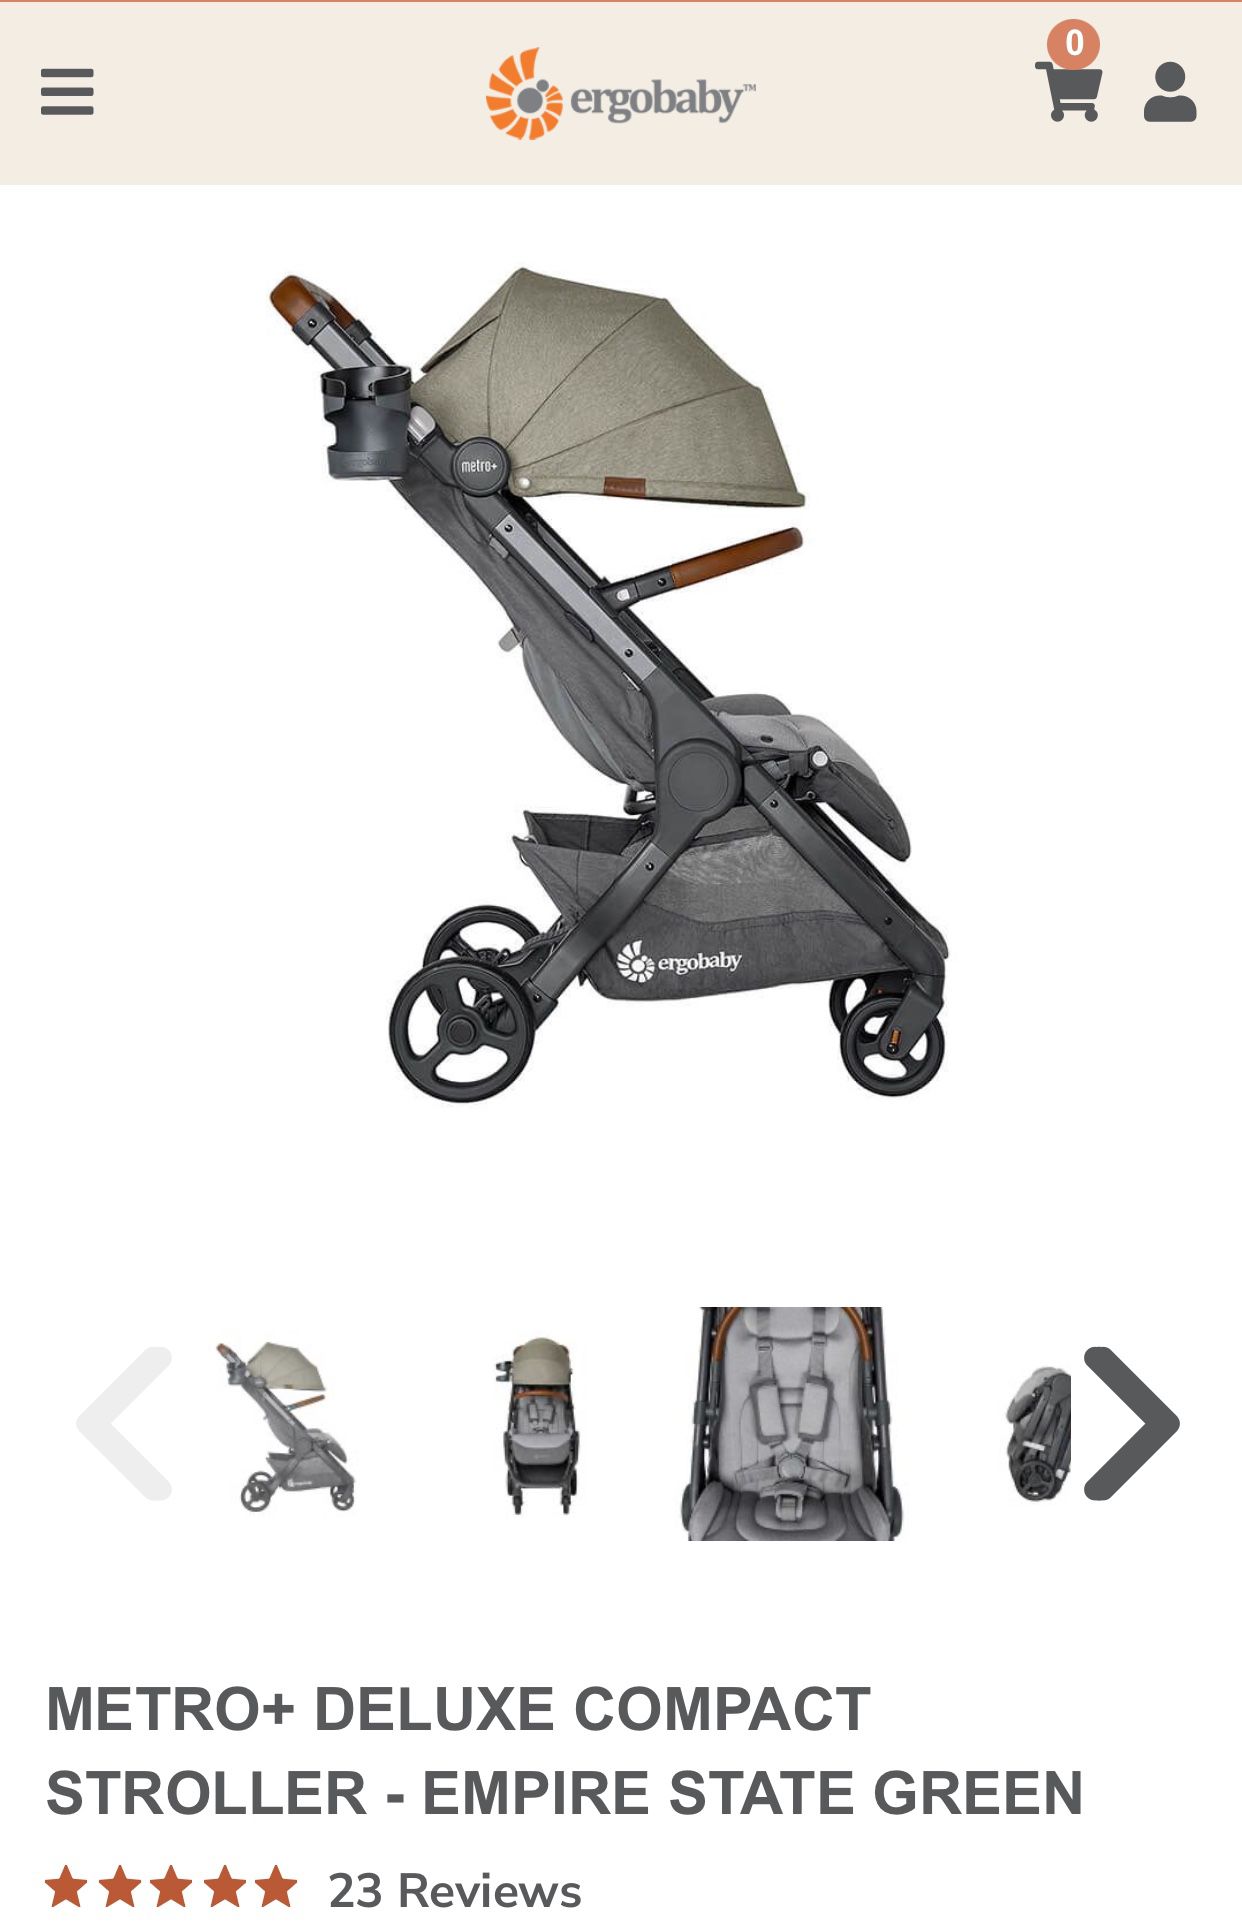 ERGOBABY METRO+ DELUXE COMPACT STROLLER - EMPIRE STATE GREEN